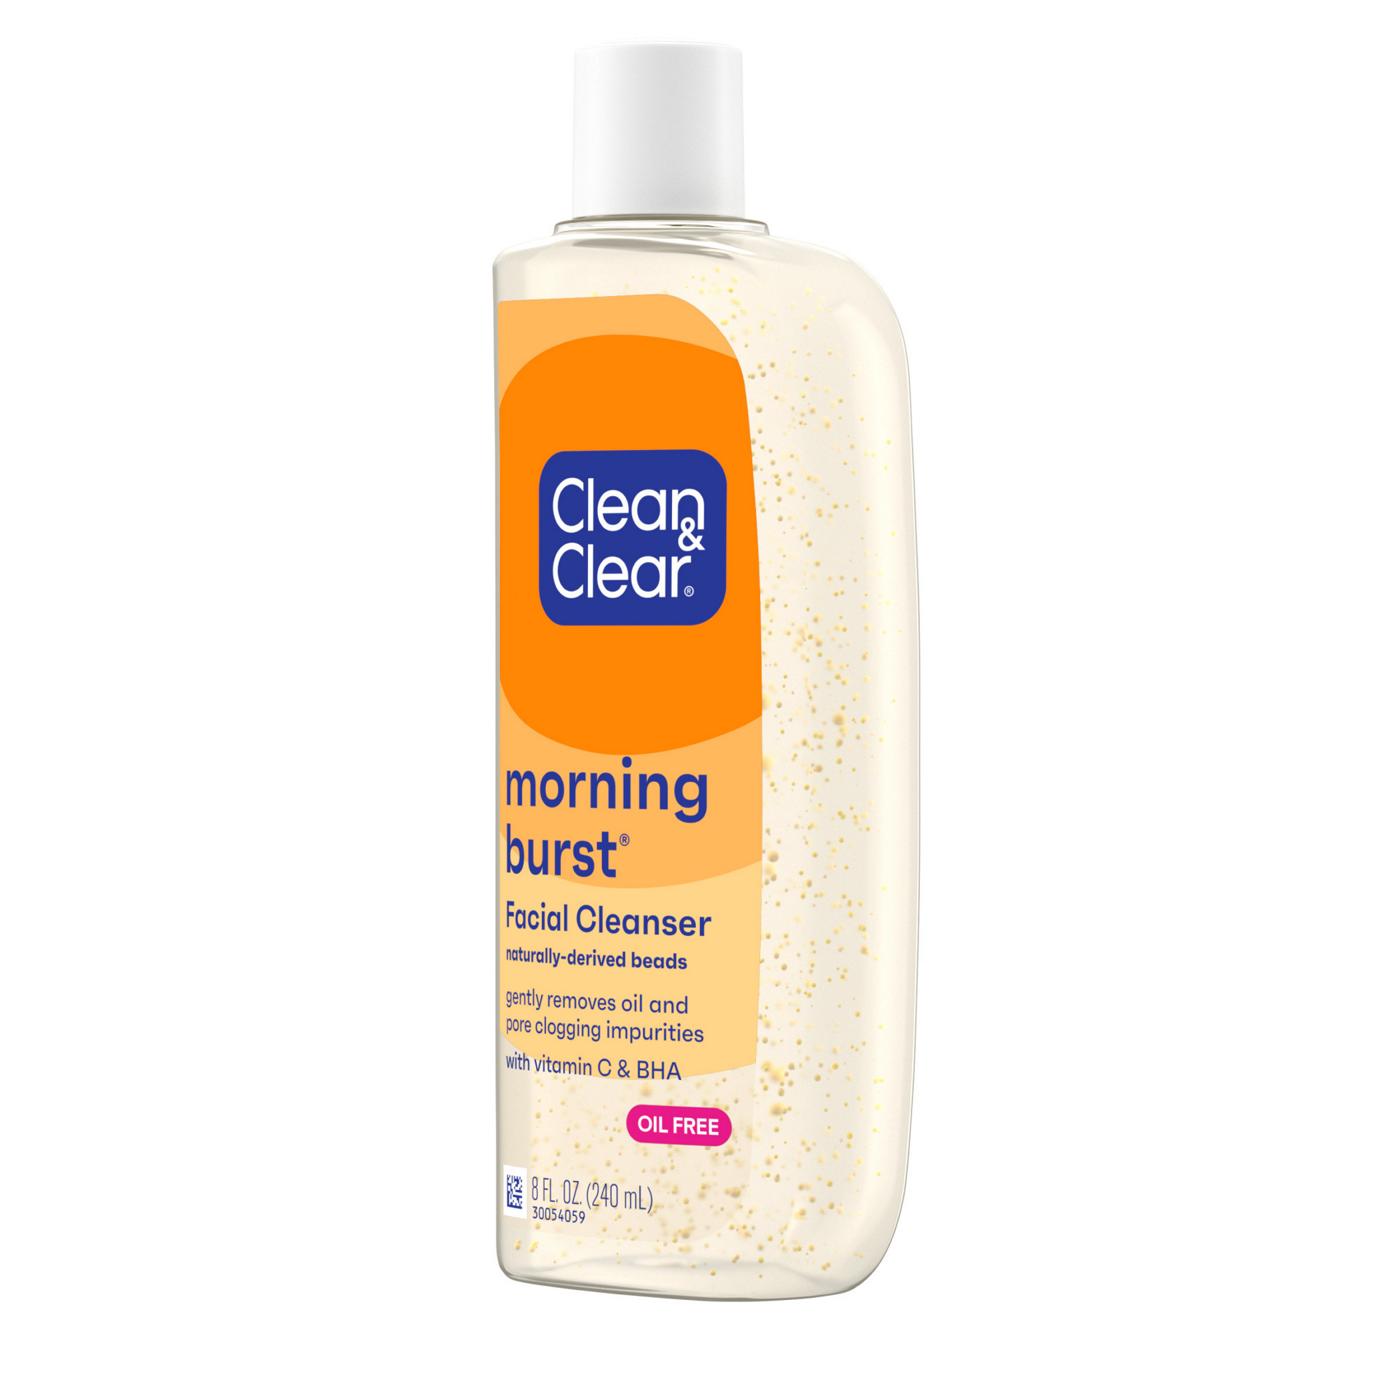 Clean & Clear Morning Burst Facial Cleanser; image 6 of 8